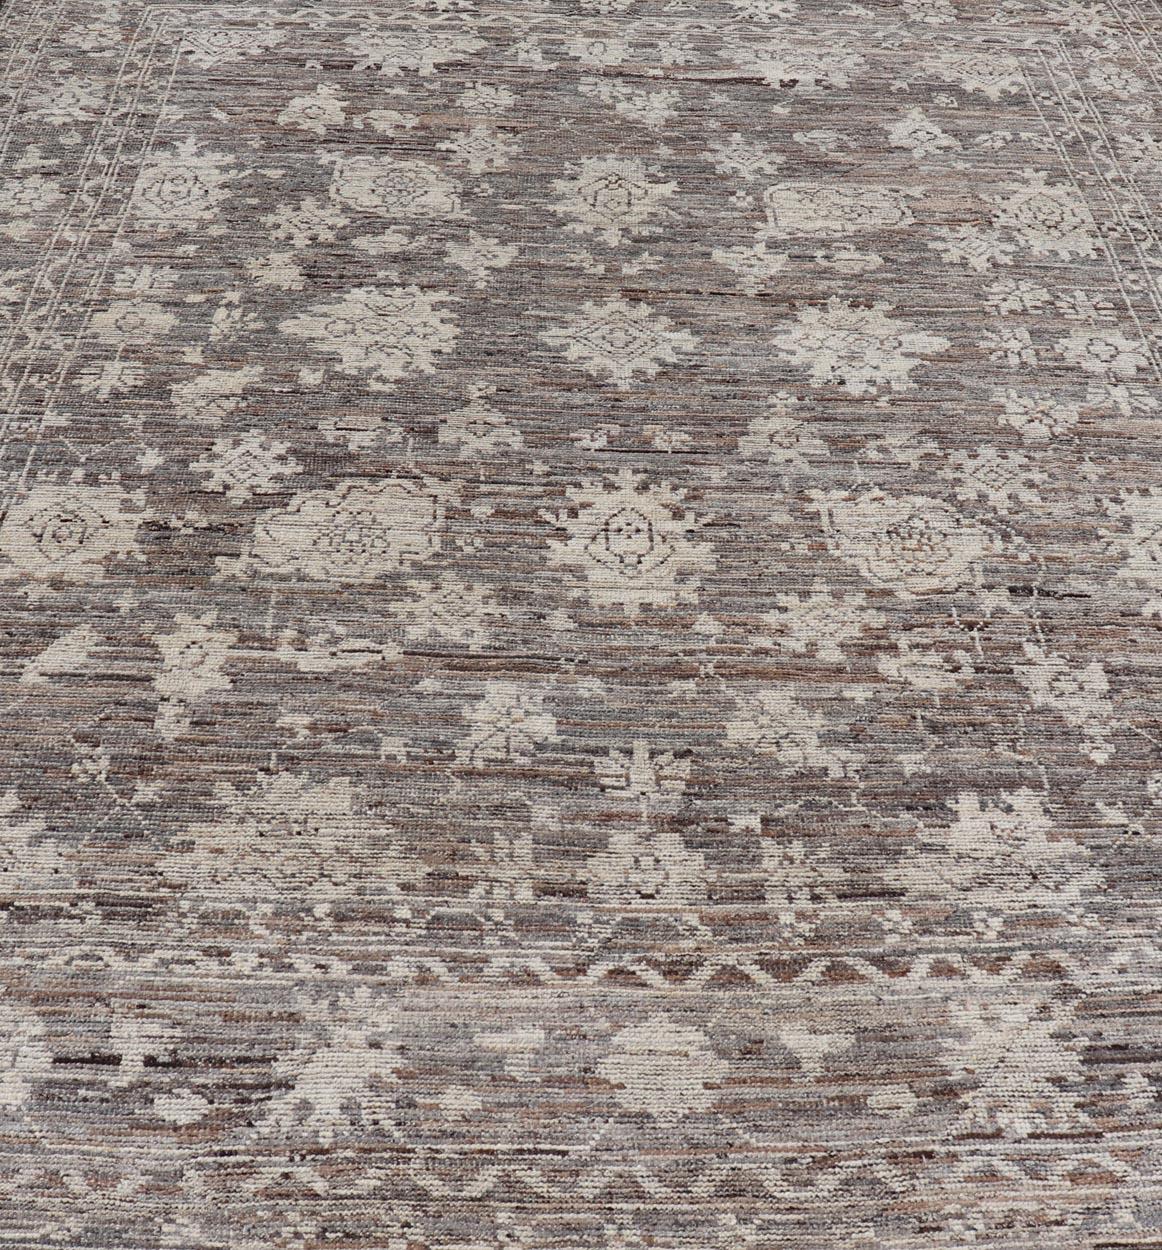 This modern tribal Oushak designed rug has been hand-knotted in wool. The rug features a modern sub-geometric floral design which is enclosed within a complementary, multi-tiered border. The rug is rendered in brown, cream and earthy